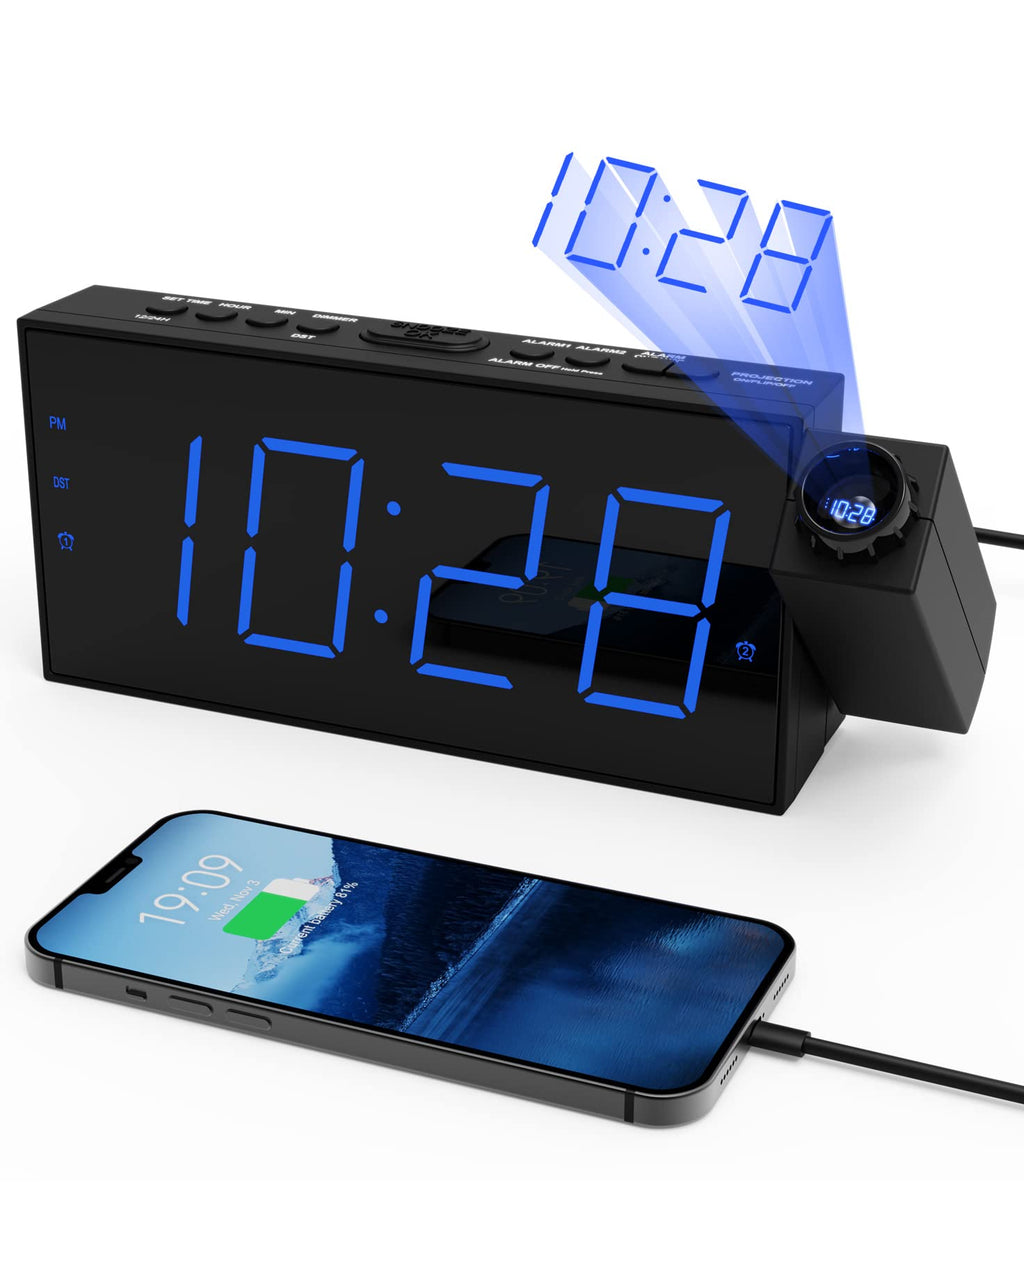  [AUSTRALIA] - Projection Alarm Clock for Bedroom,LED Digital Clock Projection on Ceiling Wall with USB Phone Charging,Battery Backup,180°Projector& Dimmer,12/24H,DST,Snooze,Dual Loud Bedside Clock for Heavy Sleeper Blue